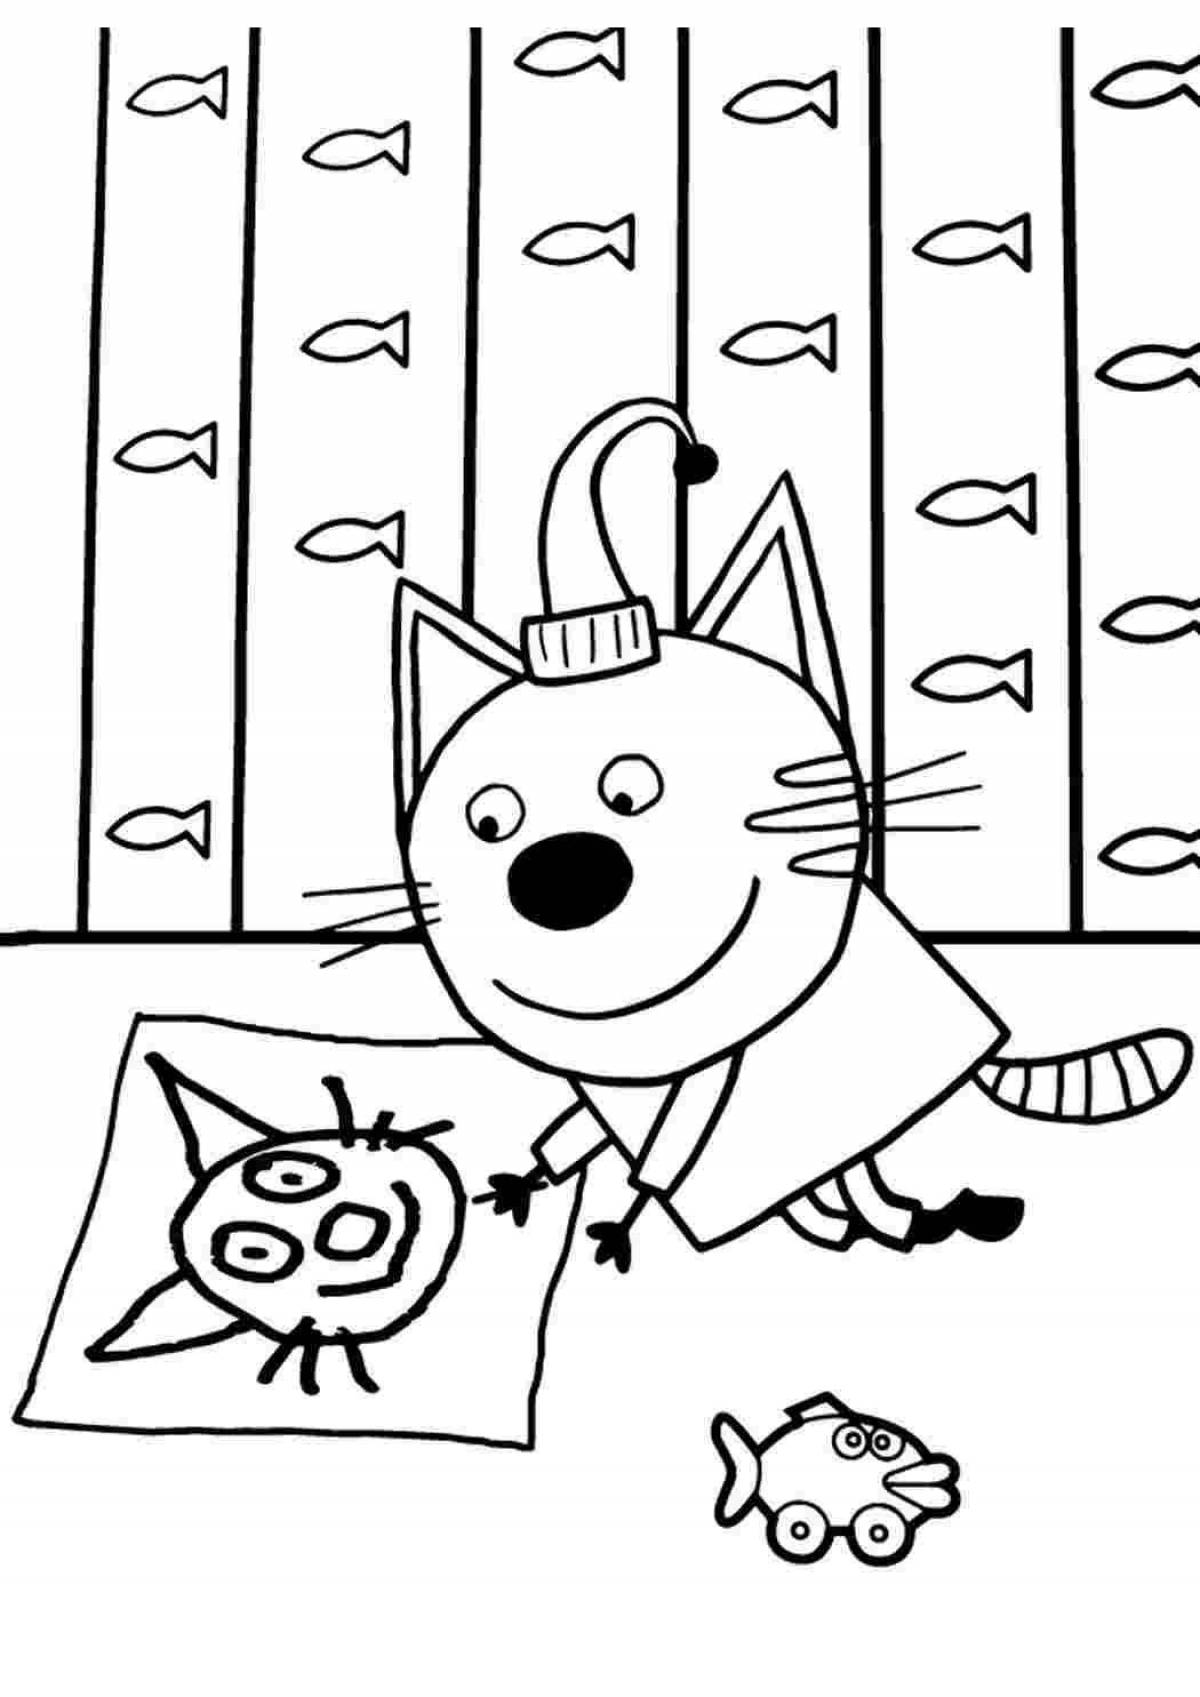 Colorful-cats three cats coloring book